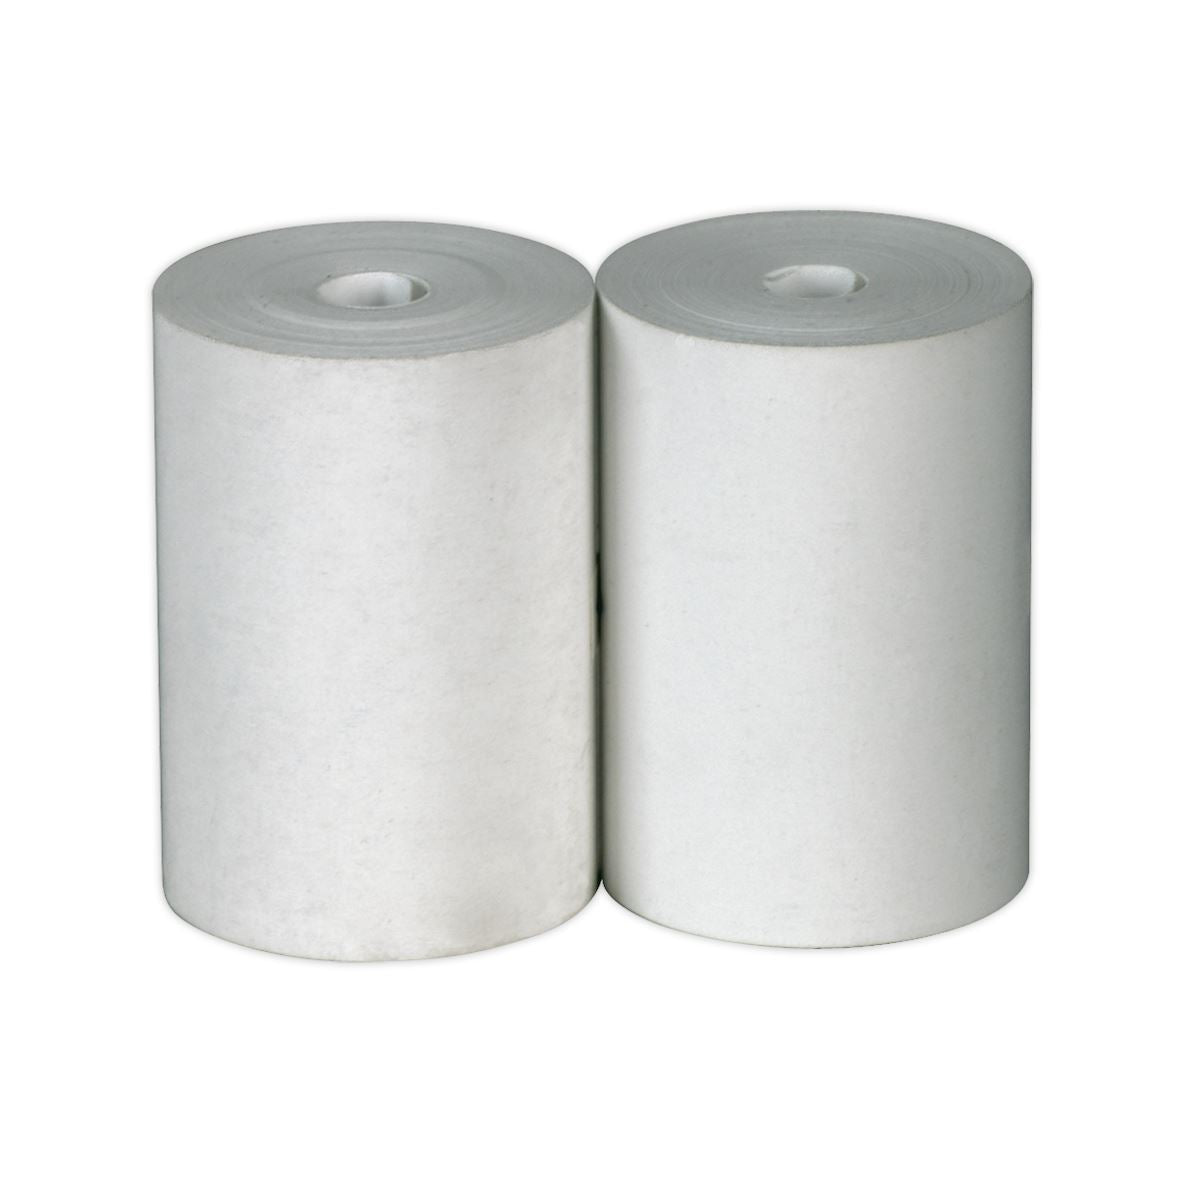 Sealey Printing Roll for BT2003 & BT2014 - Pack of 2